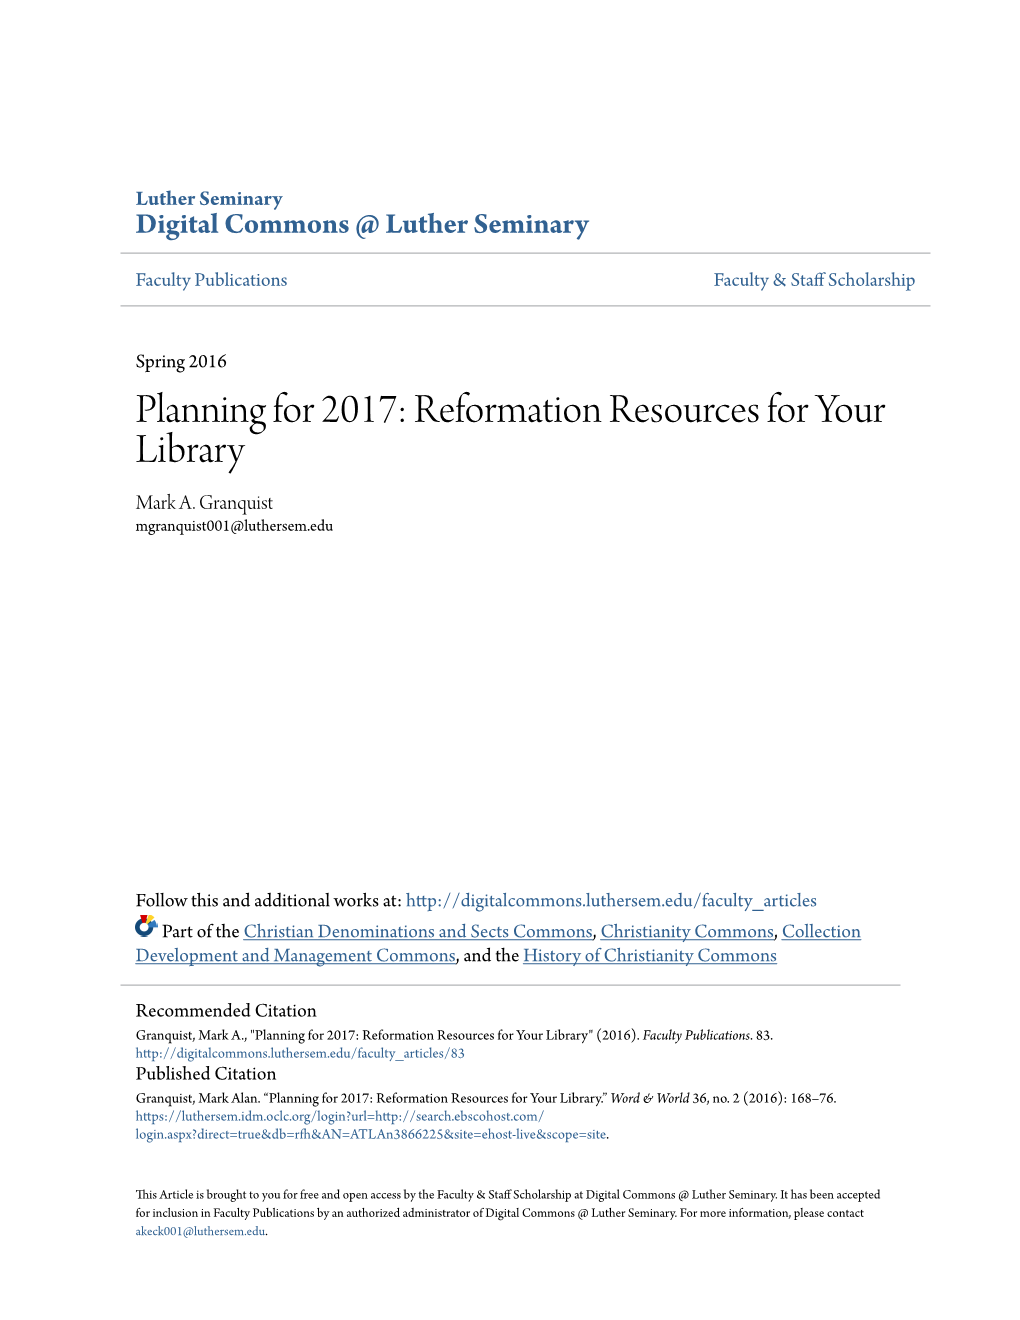 Planning for 2017: Reformation Resources for Your Library Mark A